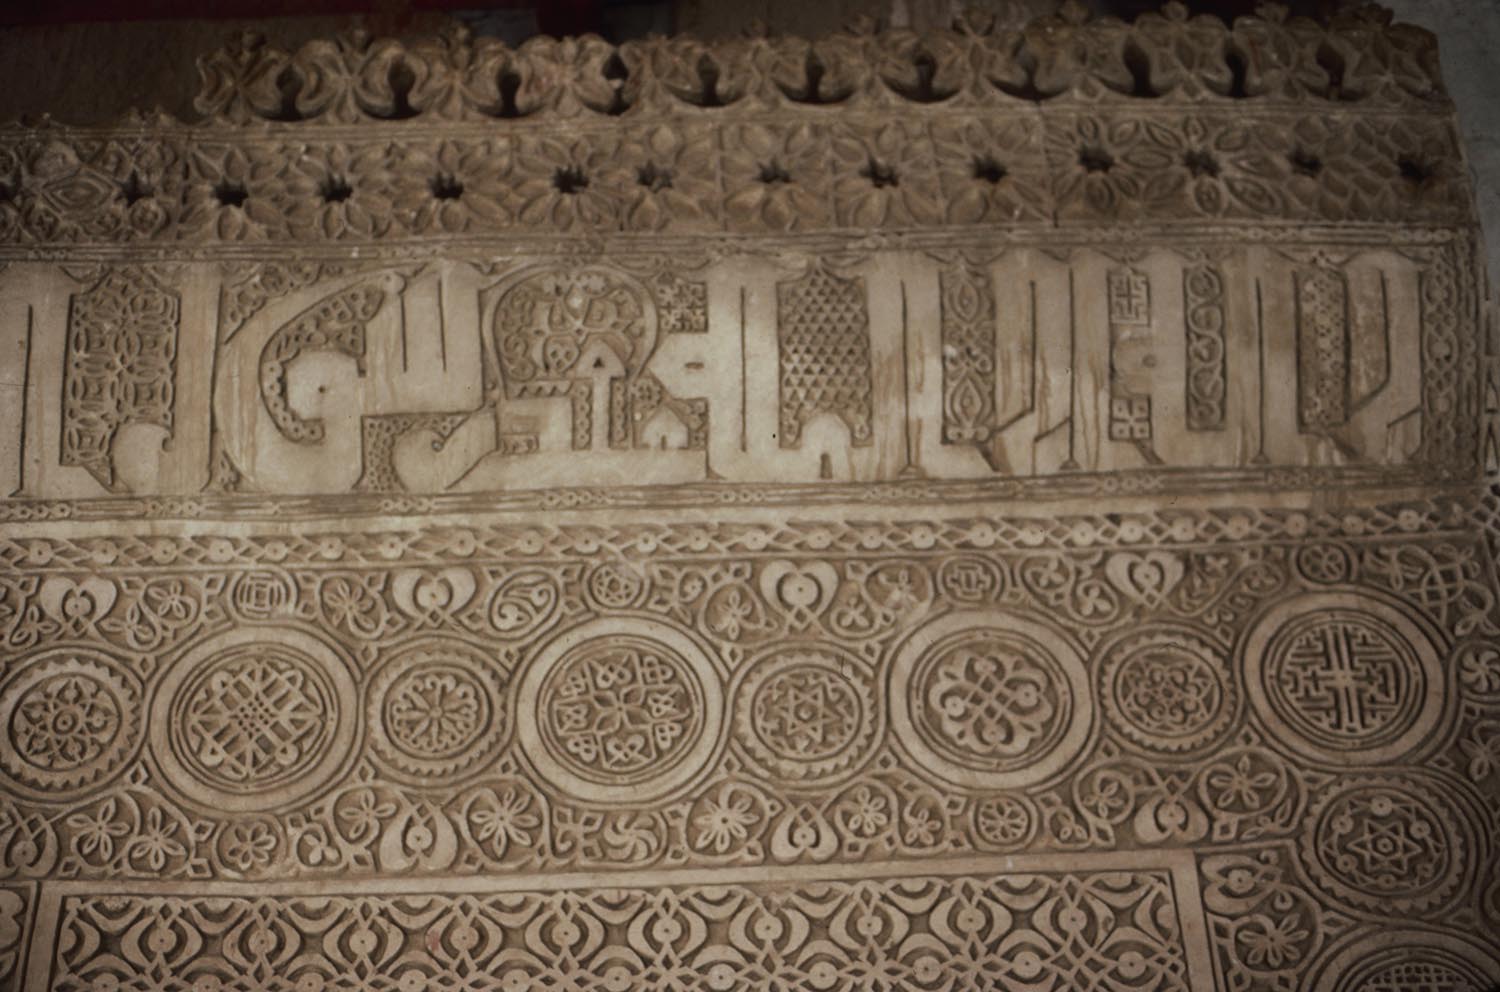 Detail of inscription on mihrab.